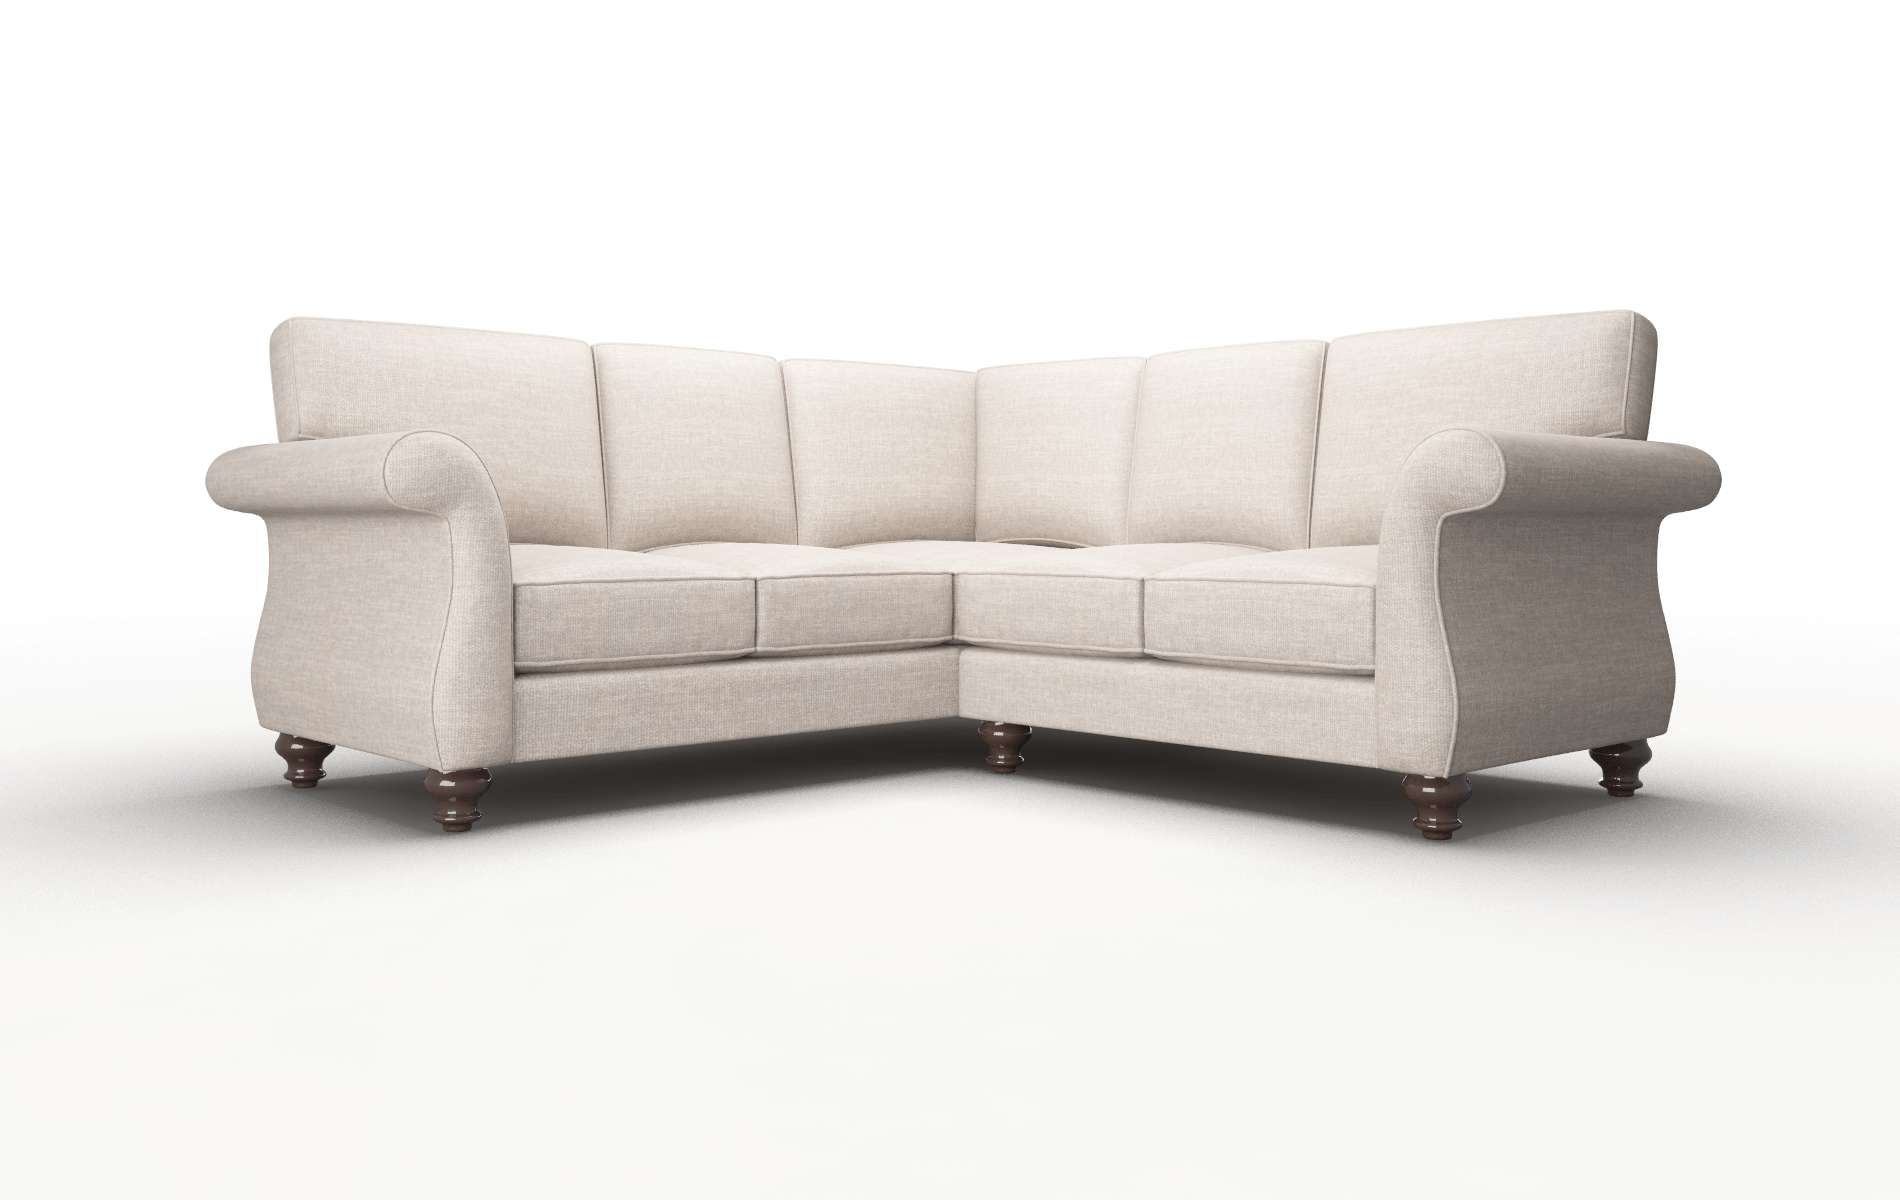 Pisa Clyde Dolphin Sectional espresso legs 1